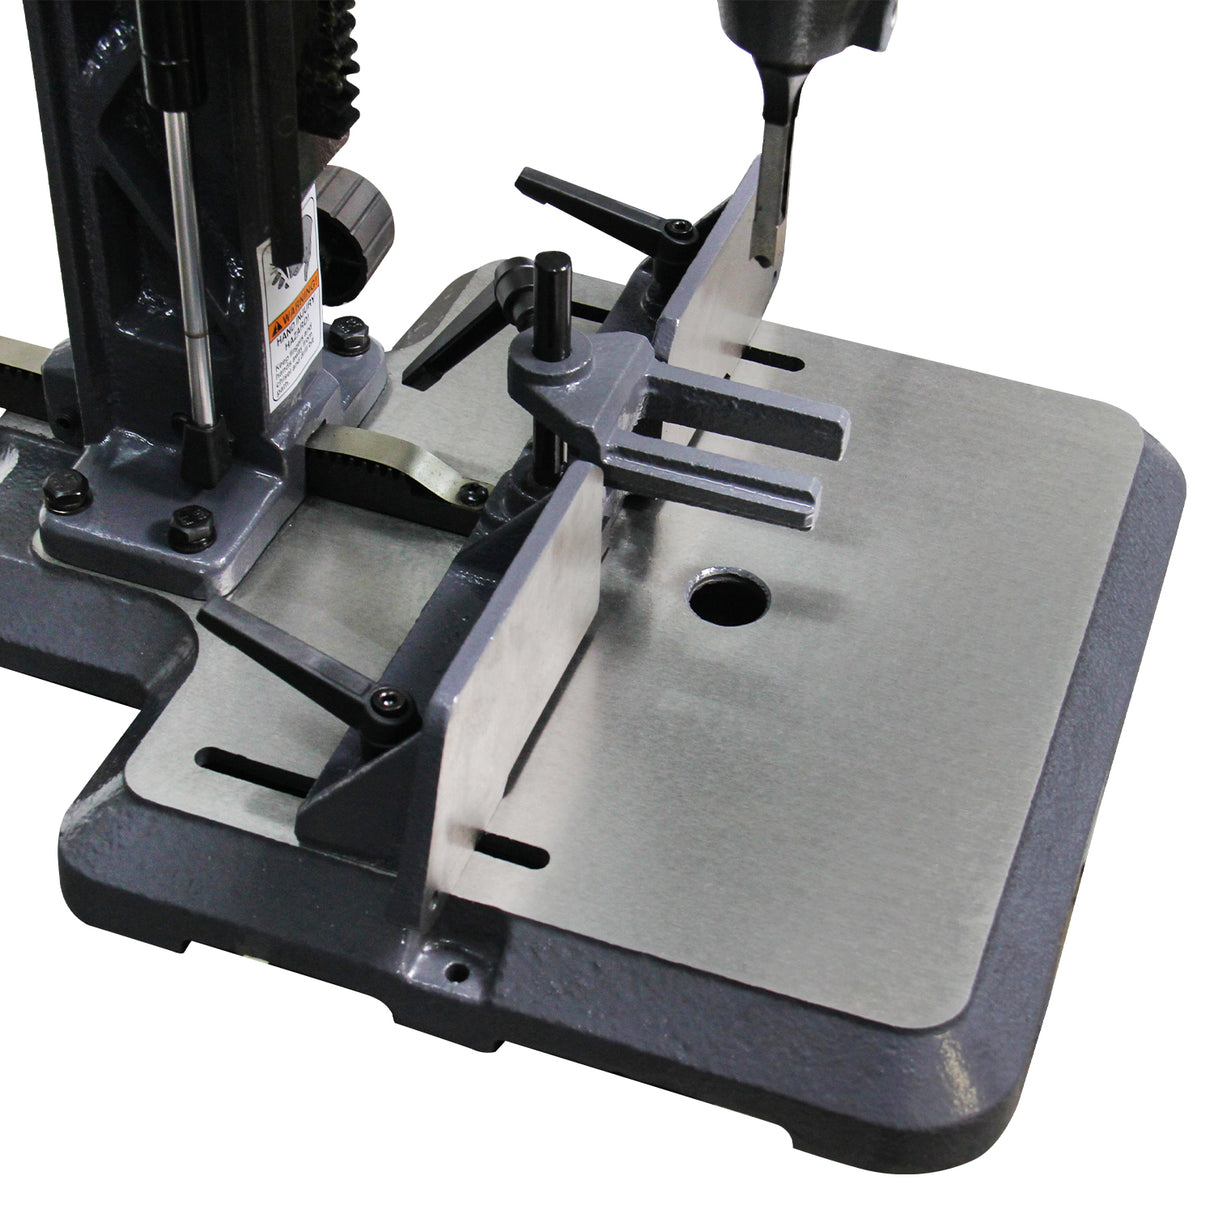 Kaka industrial MS-3816 Woodworking Mortise Machine, 1/2 HP 1725RPM Powermatic Mortiser With Chisel Bit Sets, Benchtop Mortising Machine, For Making Round Holes Square Holes, Or Special Square Holes In Wood